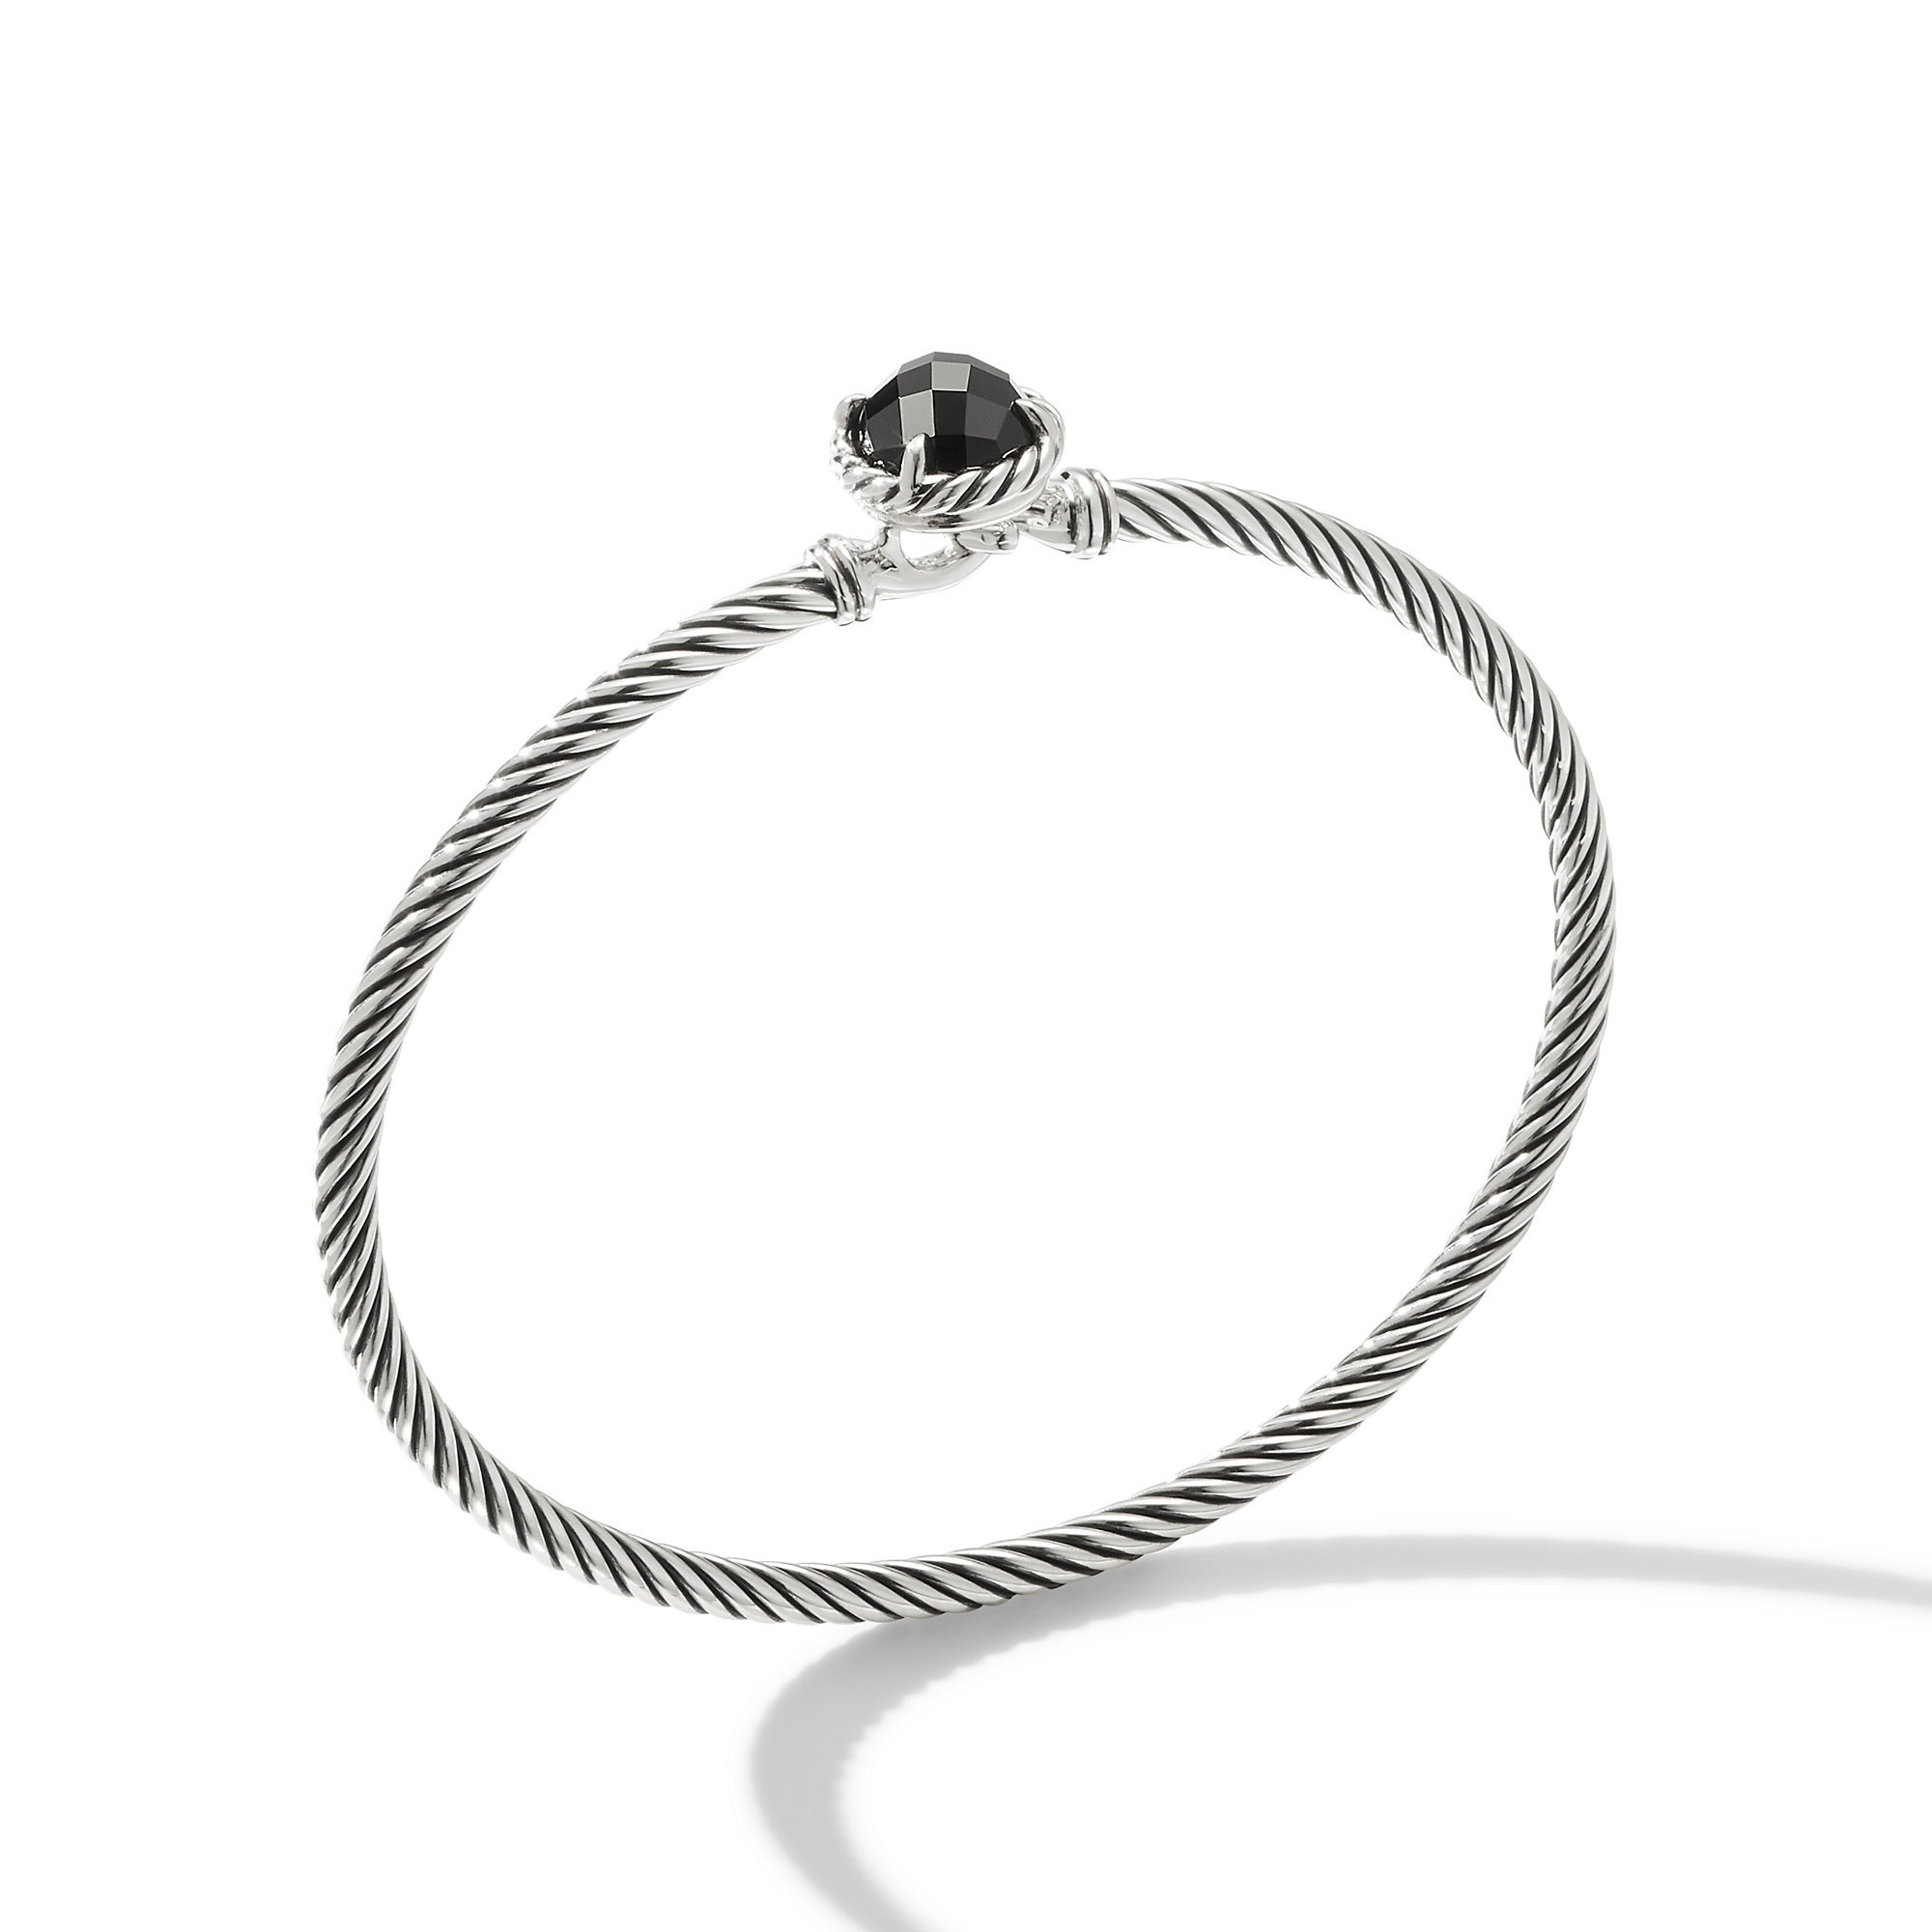 Petite Chatelaine® Bracelet in Sterling Silver with Black Onyx